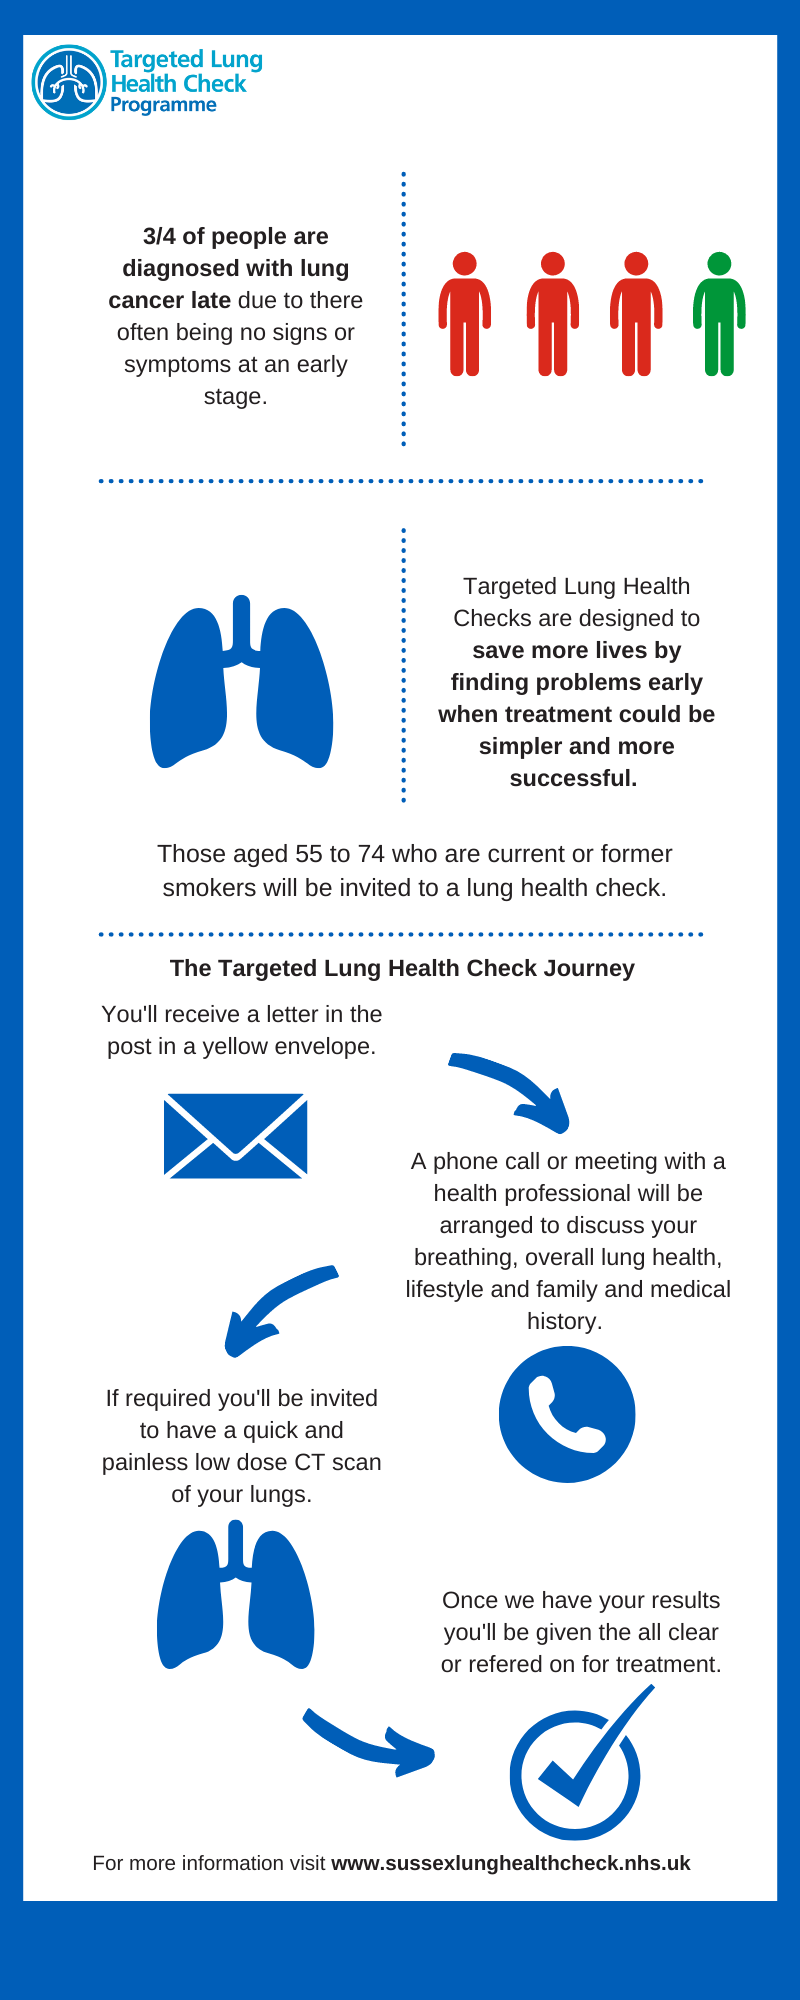 An infographic which describes how the Targeted Lung Health Check works 